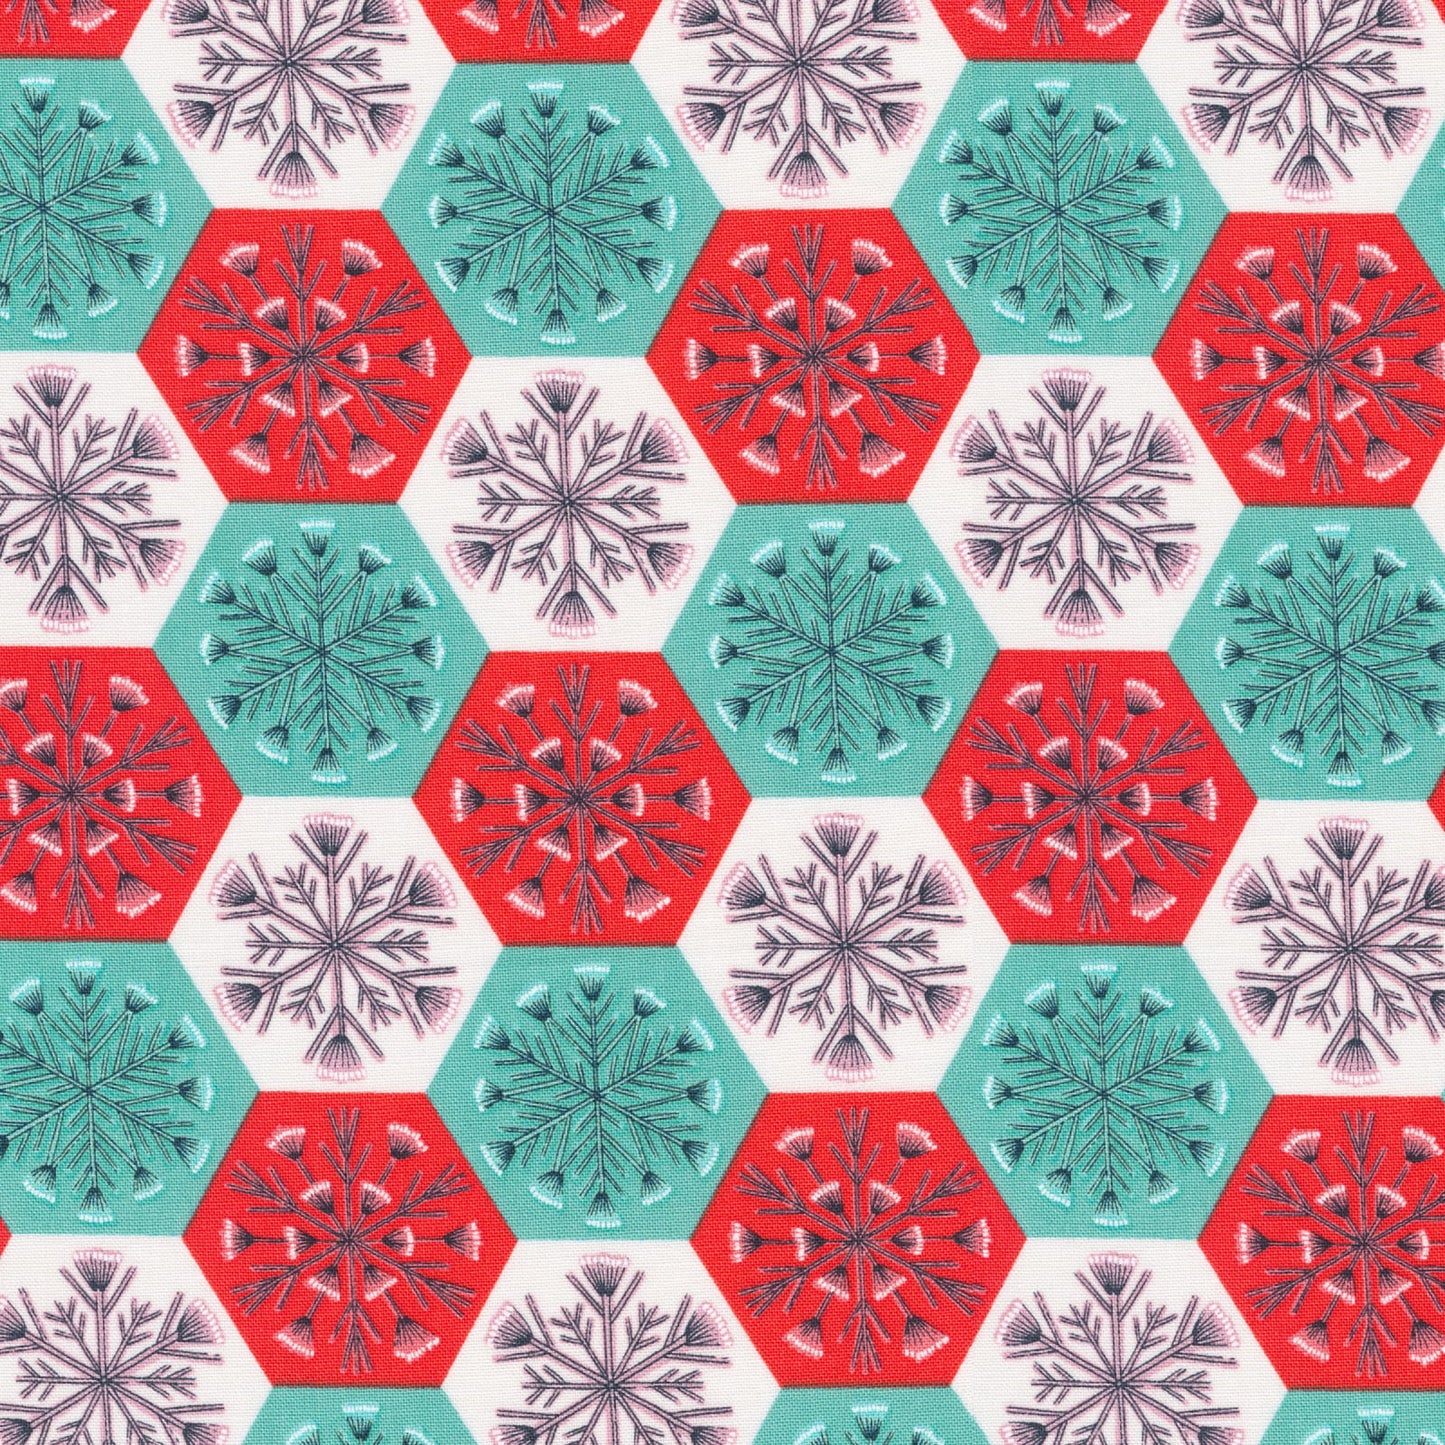 Patchwork Snowflakes - Organic Quilting Cotton Fabric - GOTS